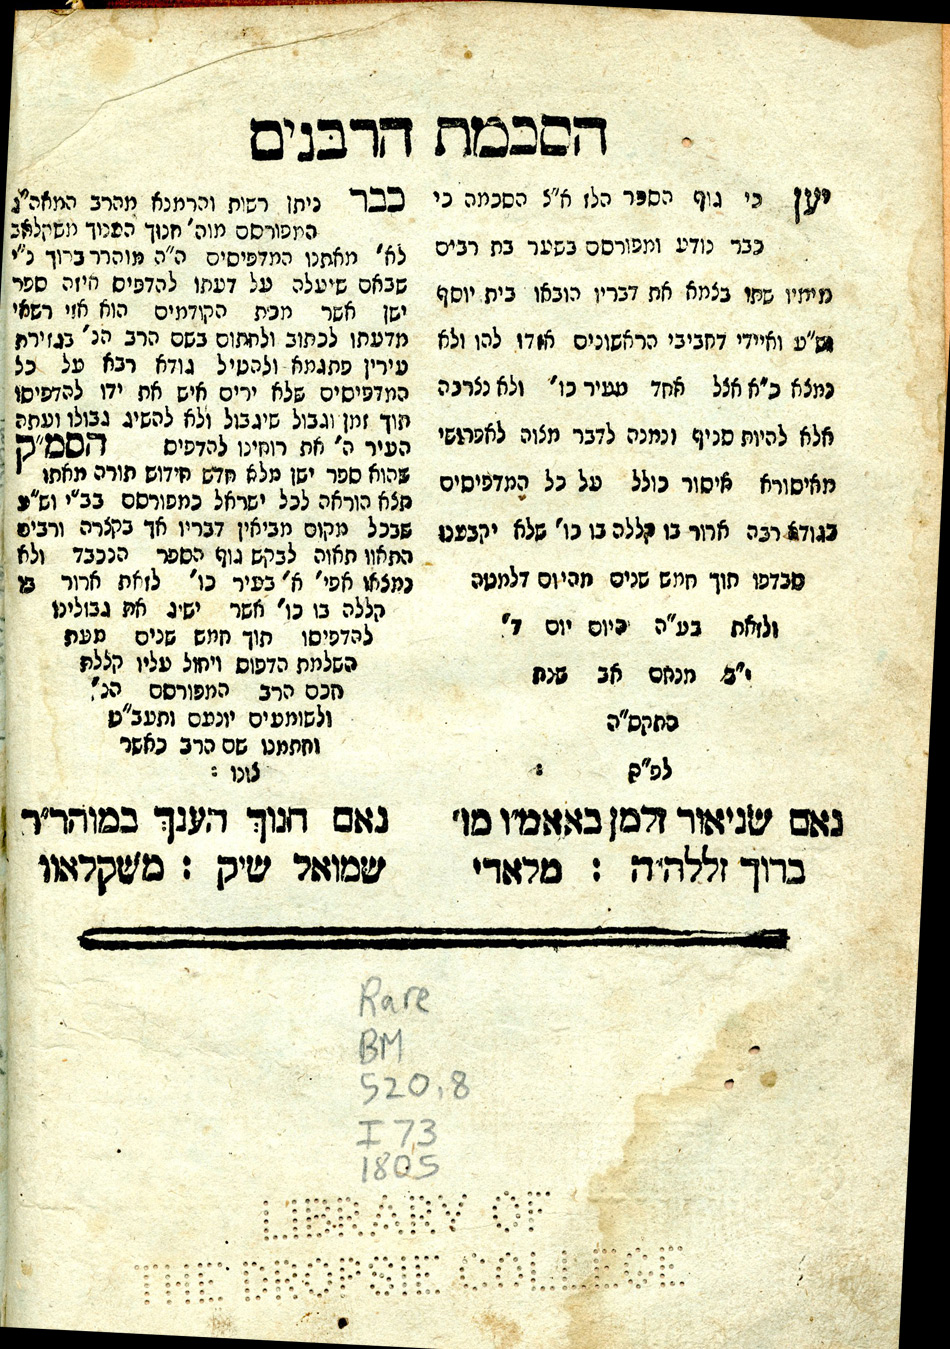 Two paragraphs of Hebrew text